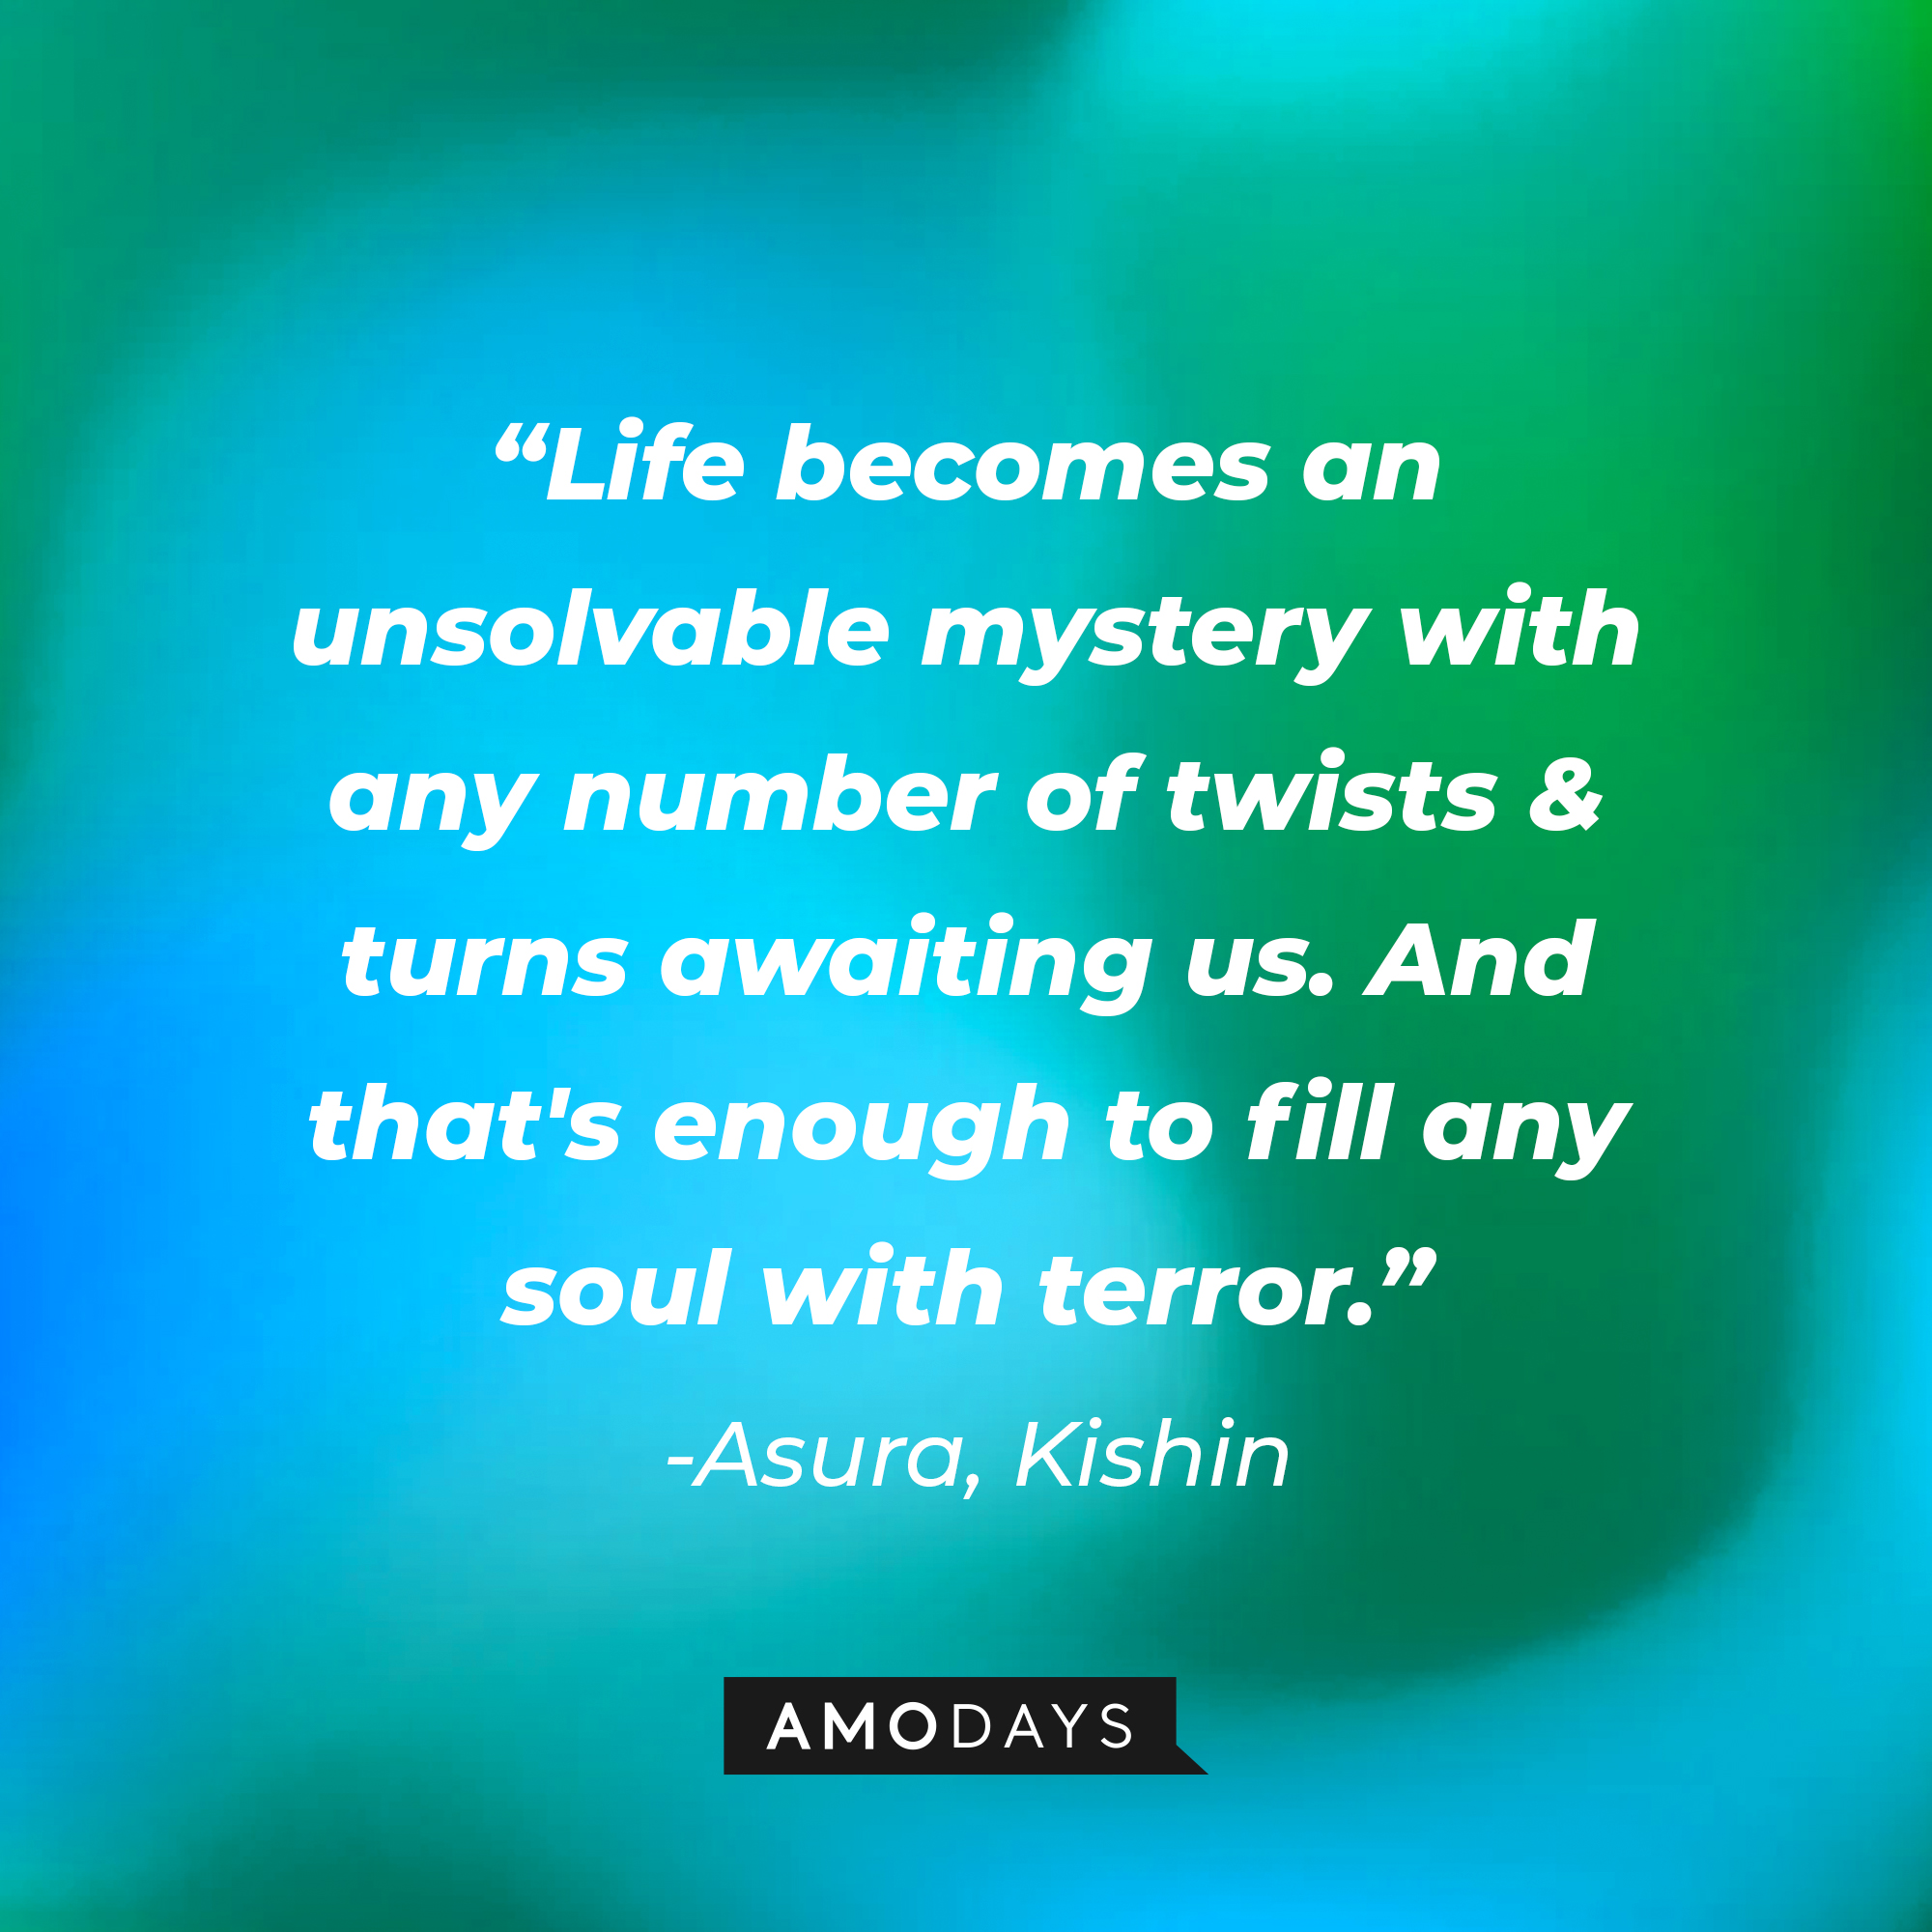 Asura, Kishin’s quote: "Life becomes an unsolvable mystery with any number of twists & turns awaiting us. And that's enough to fill any soul with terror." | Image: AmoDays